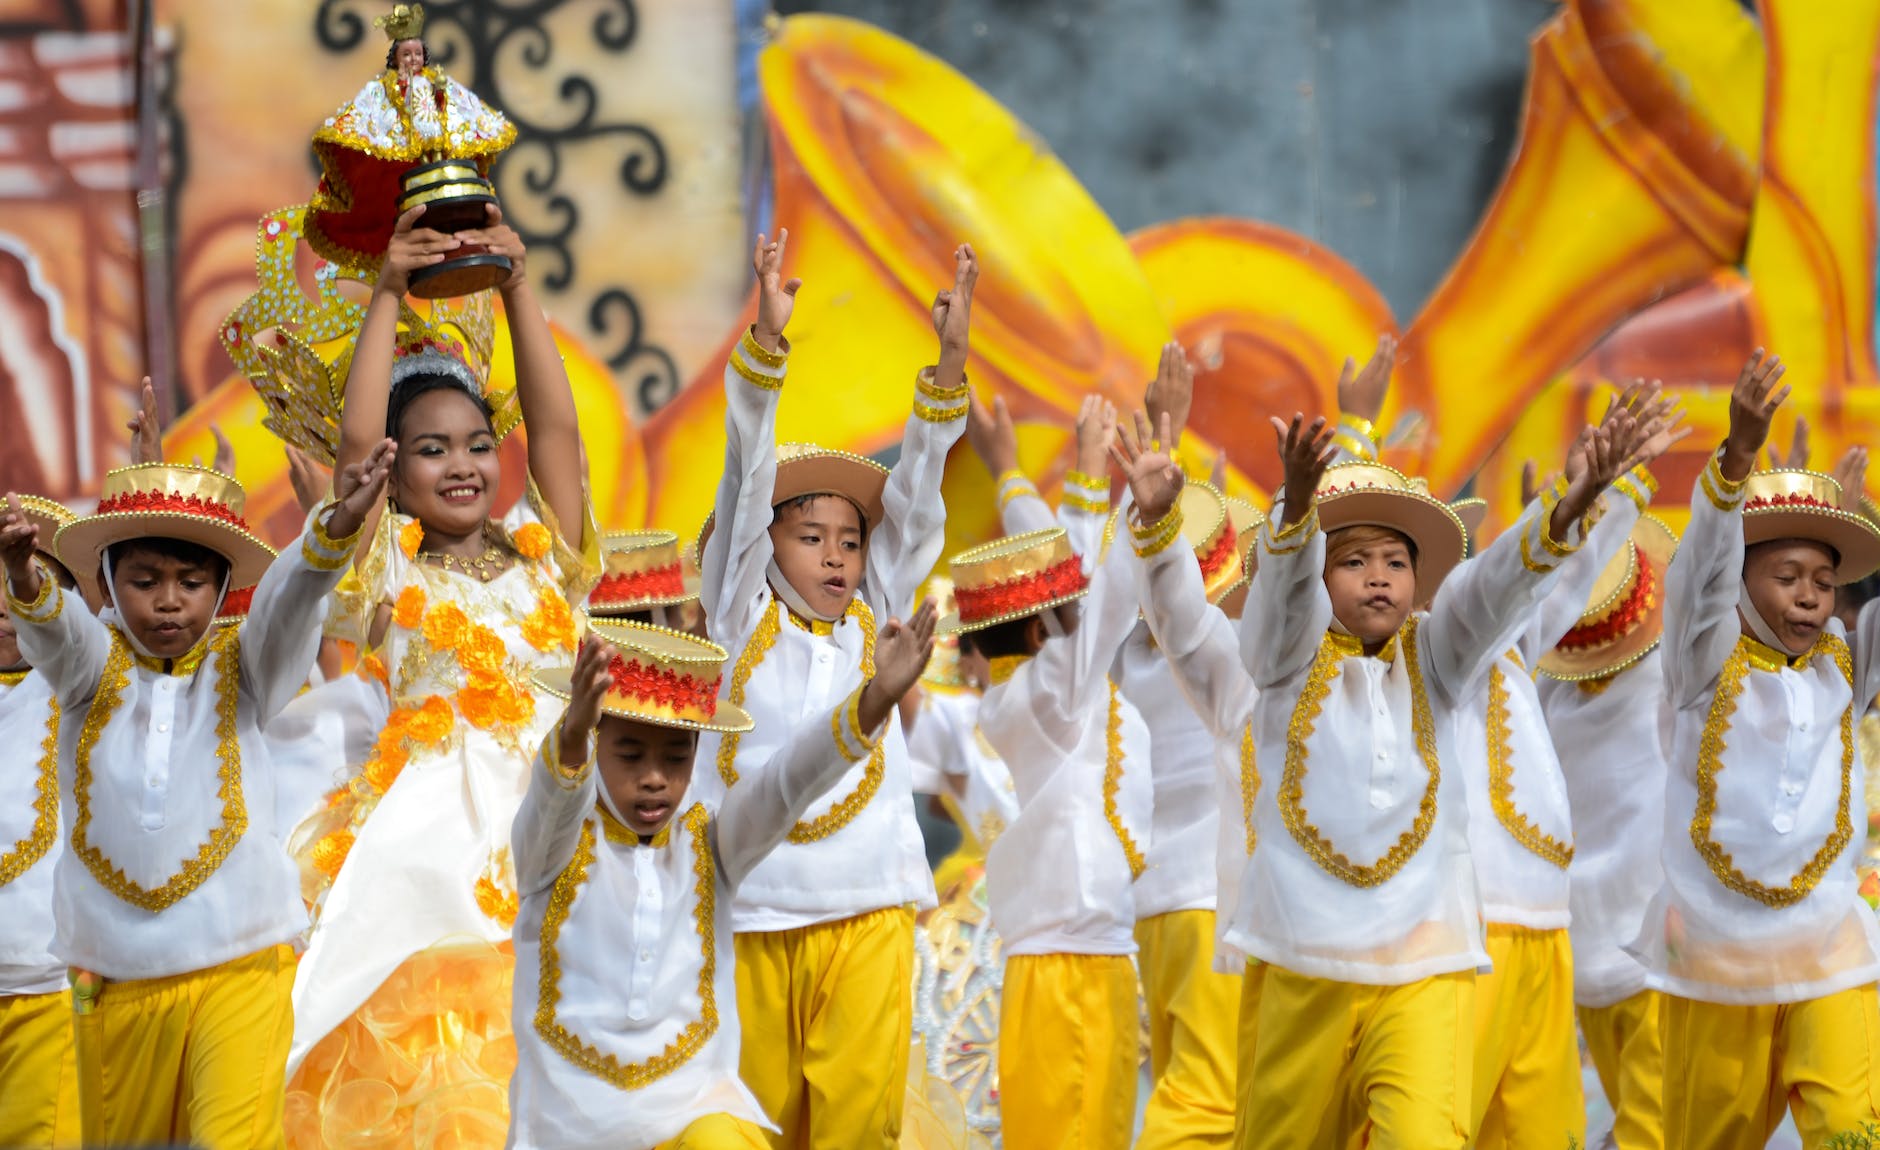 A joyful group of children in colorful costumes dancing during the Sinulog Festival in Cebu City, Philippines.